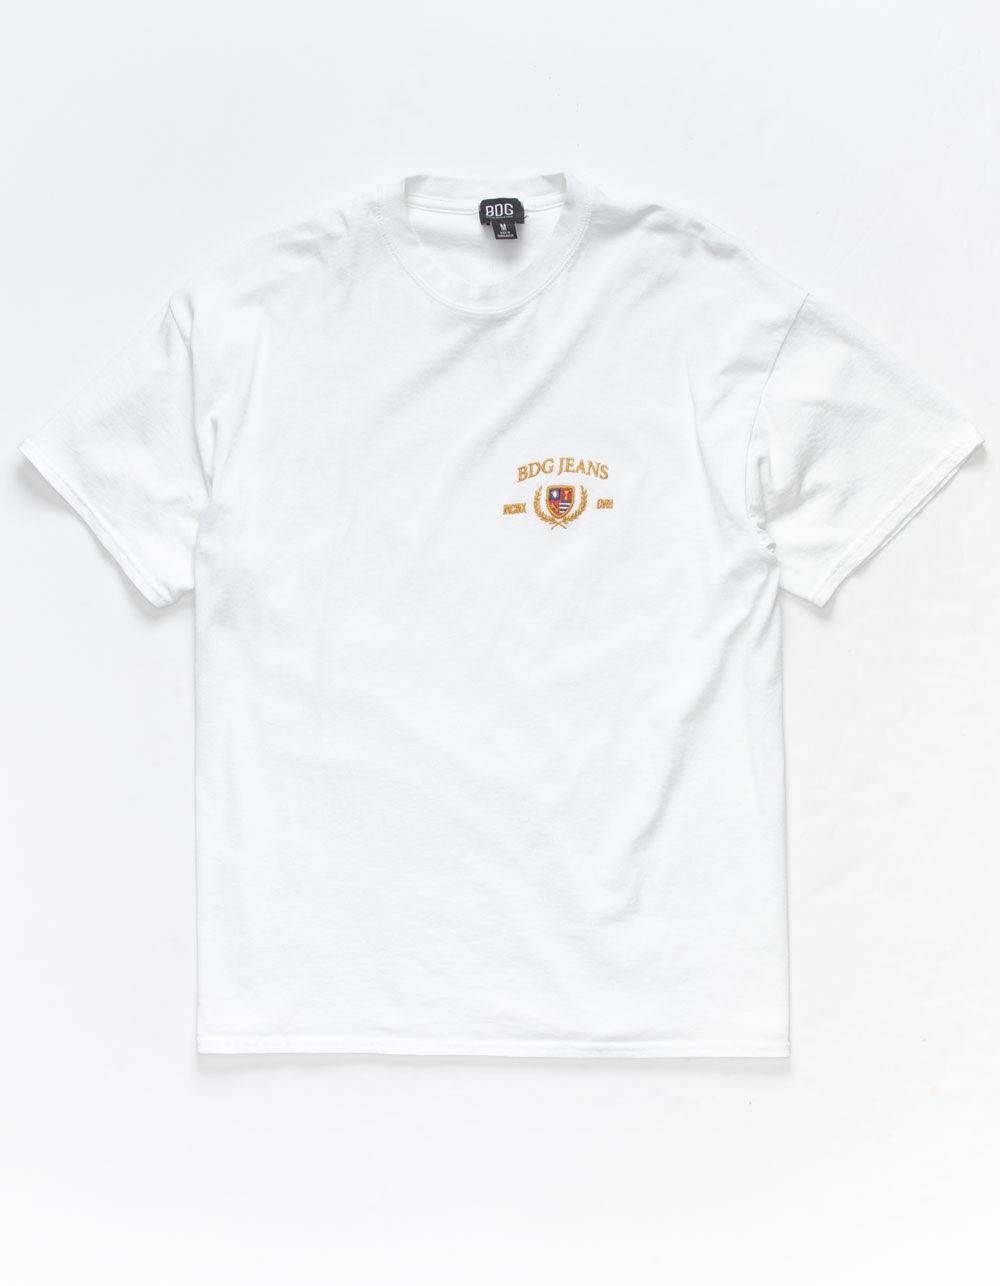 BDG Urban Outfitters Heritage Crest Mens Tee - WHITE | Tillys